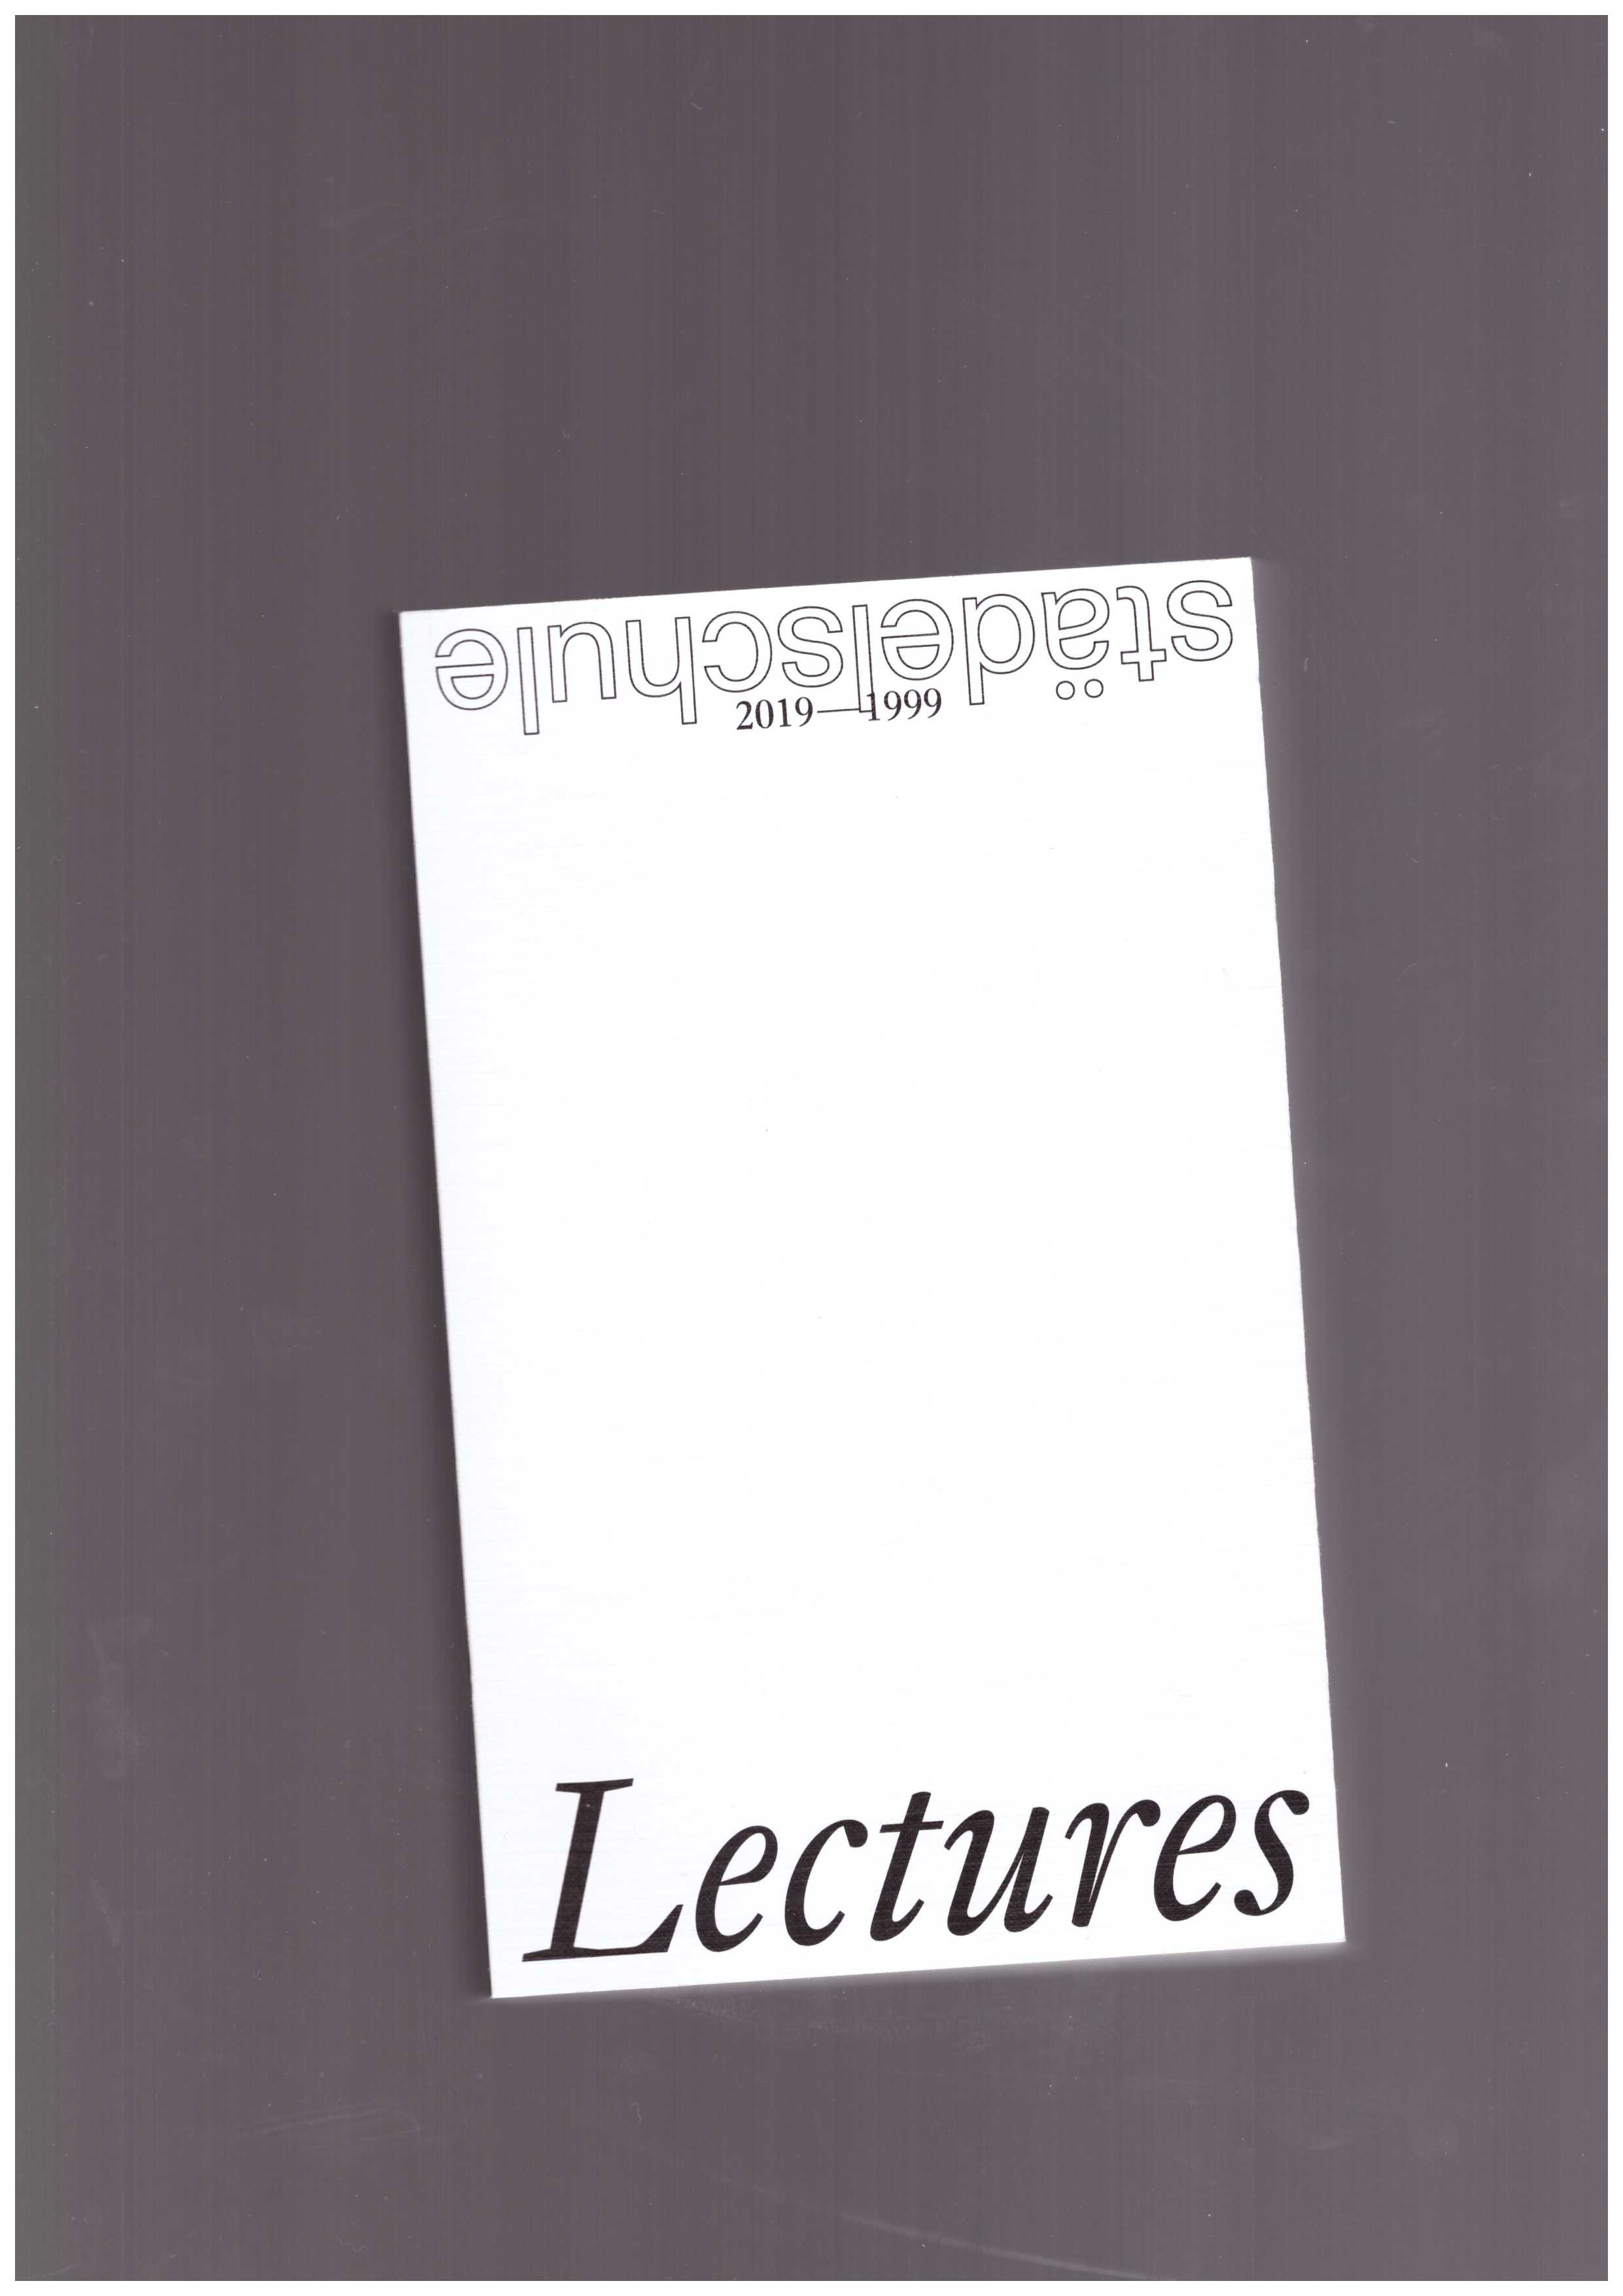 PIROTTE, Philippe (ed.) - Städelschule Lectures 1